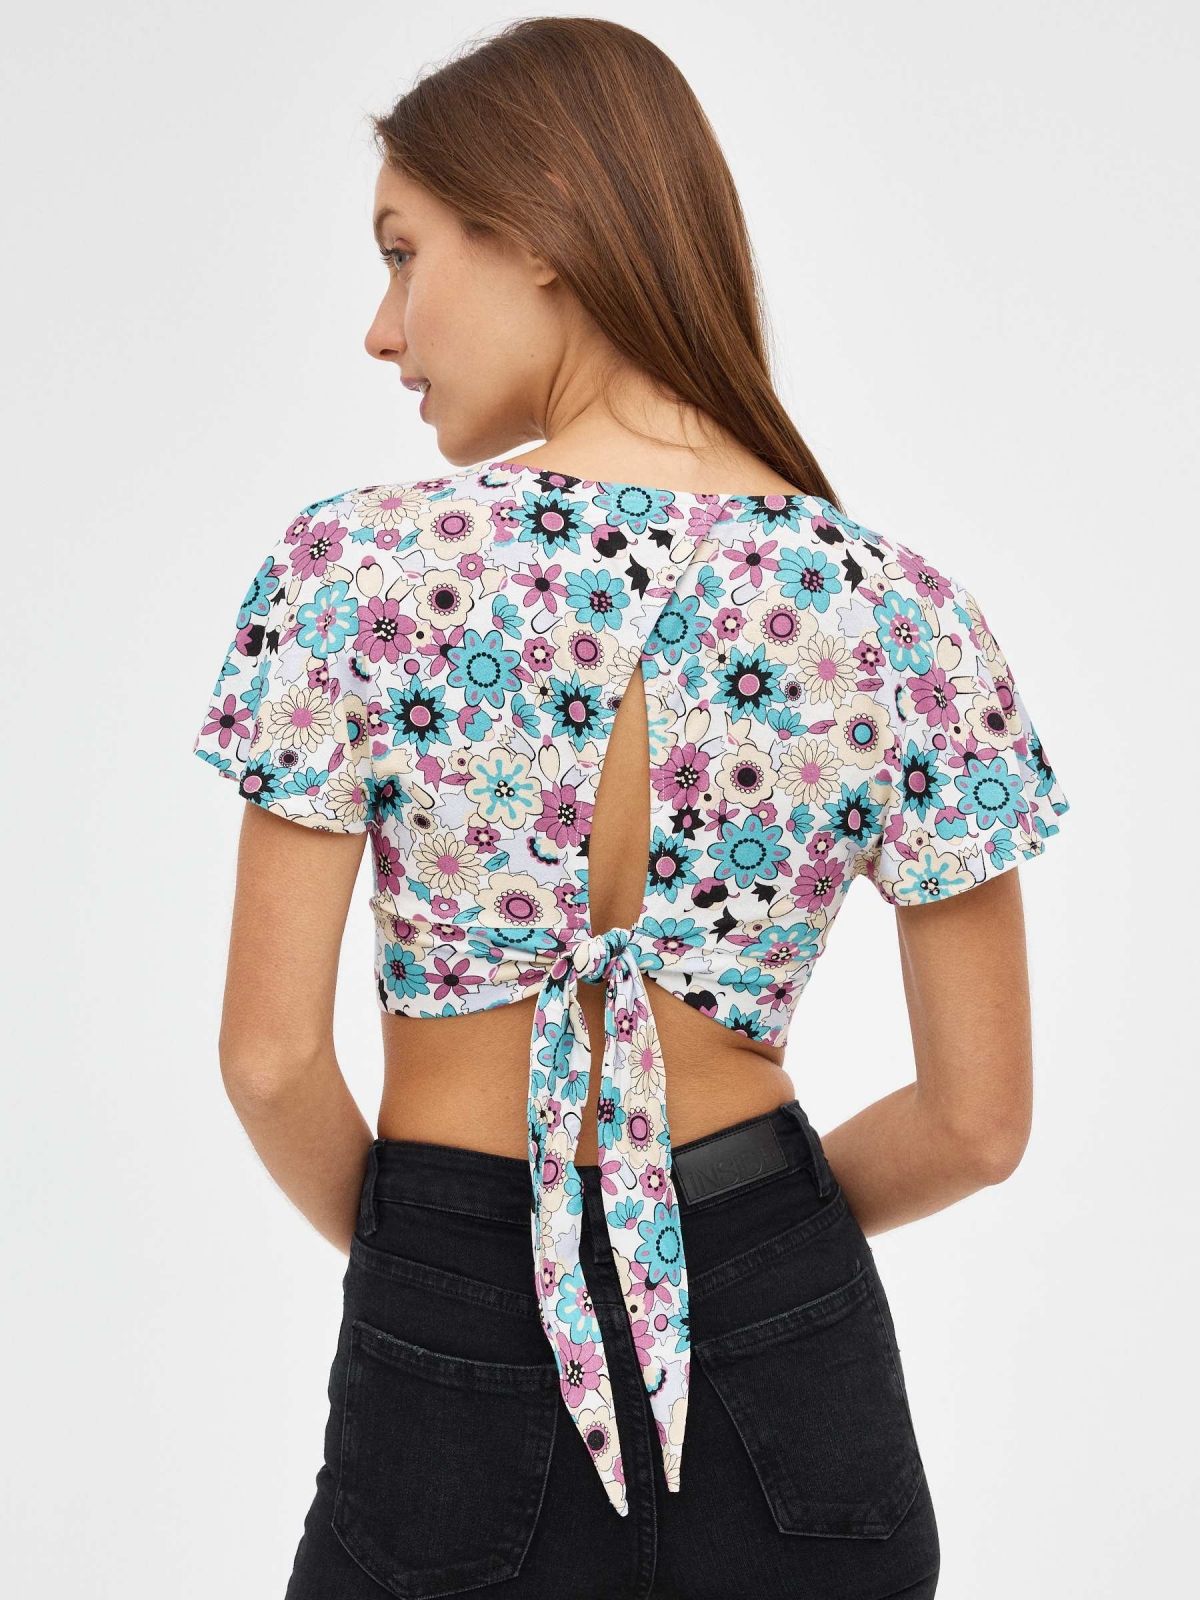 Flower crop top with bow white middle back view